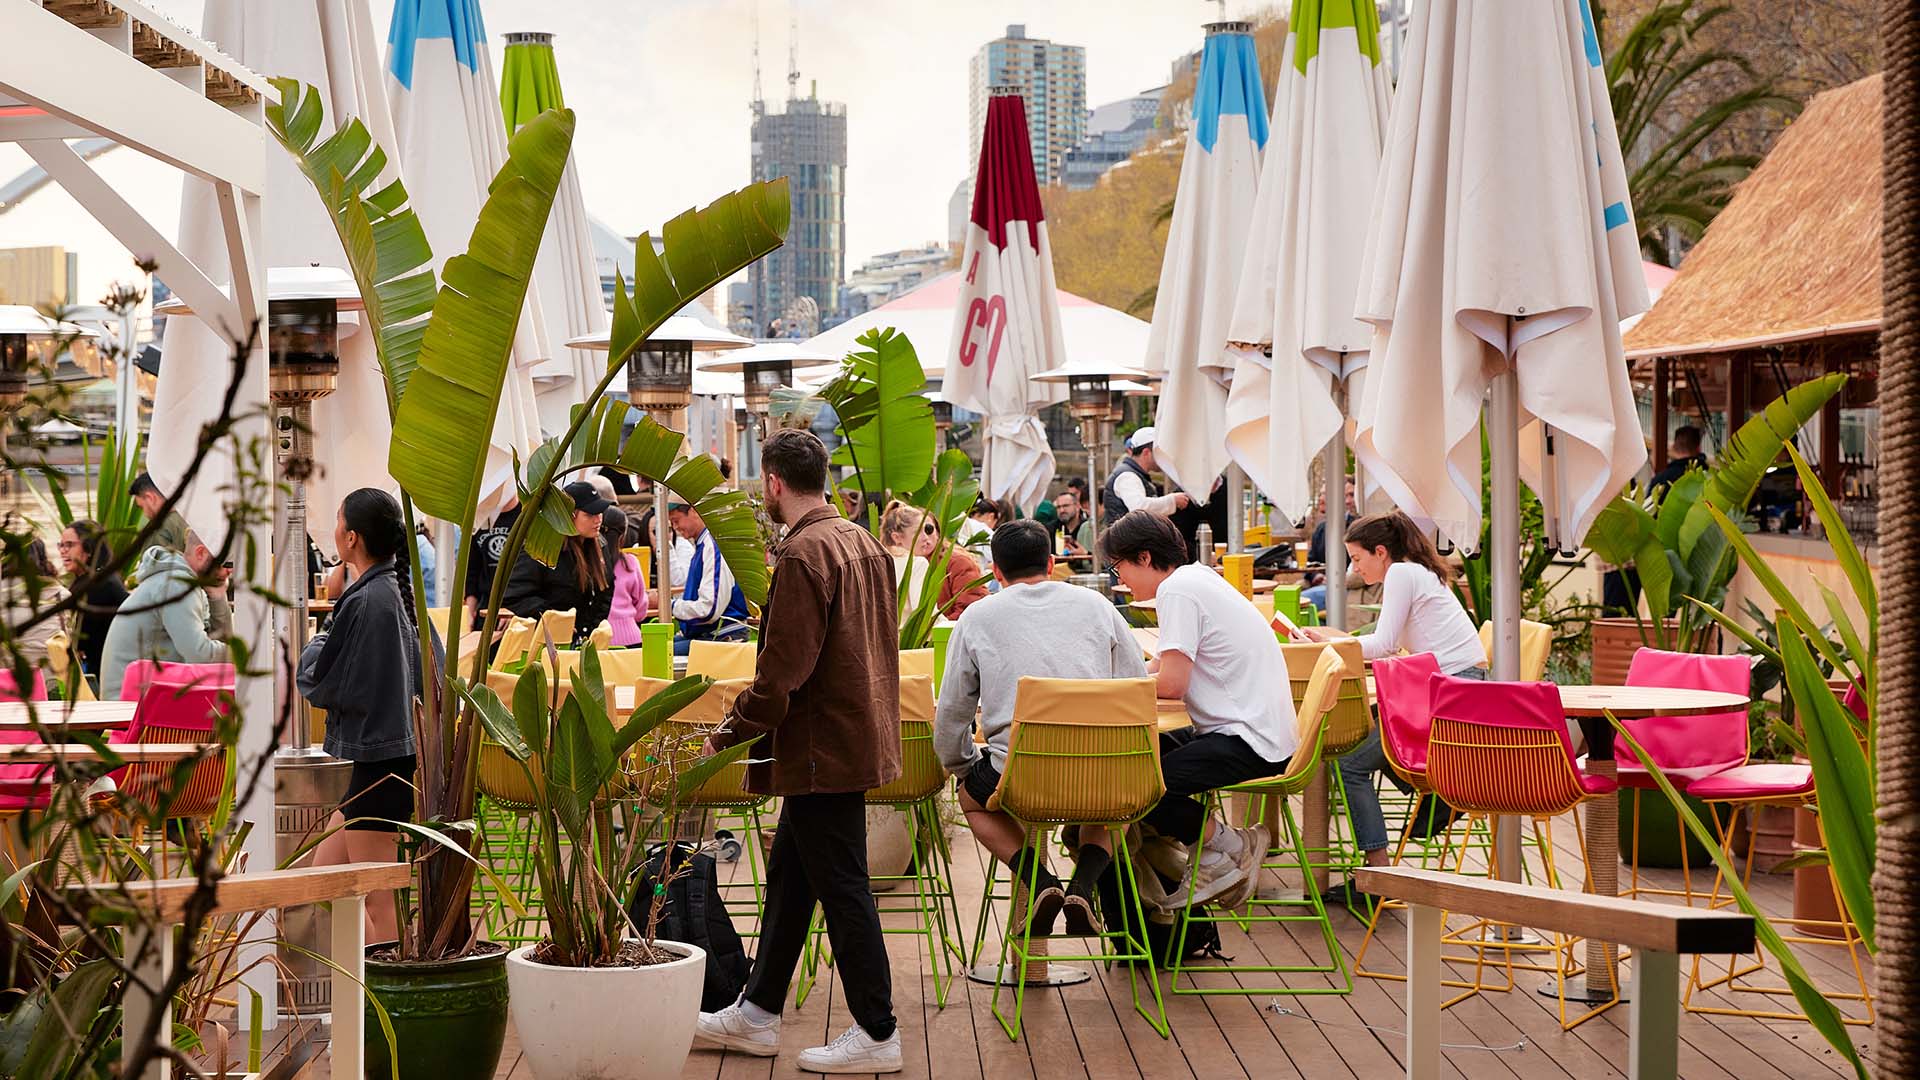 Now Open: Floating Bar and Restaurant Afloat Is Back on the Yarra with Margaritas, Mezcal and Mexican Bites